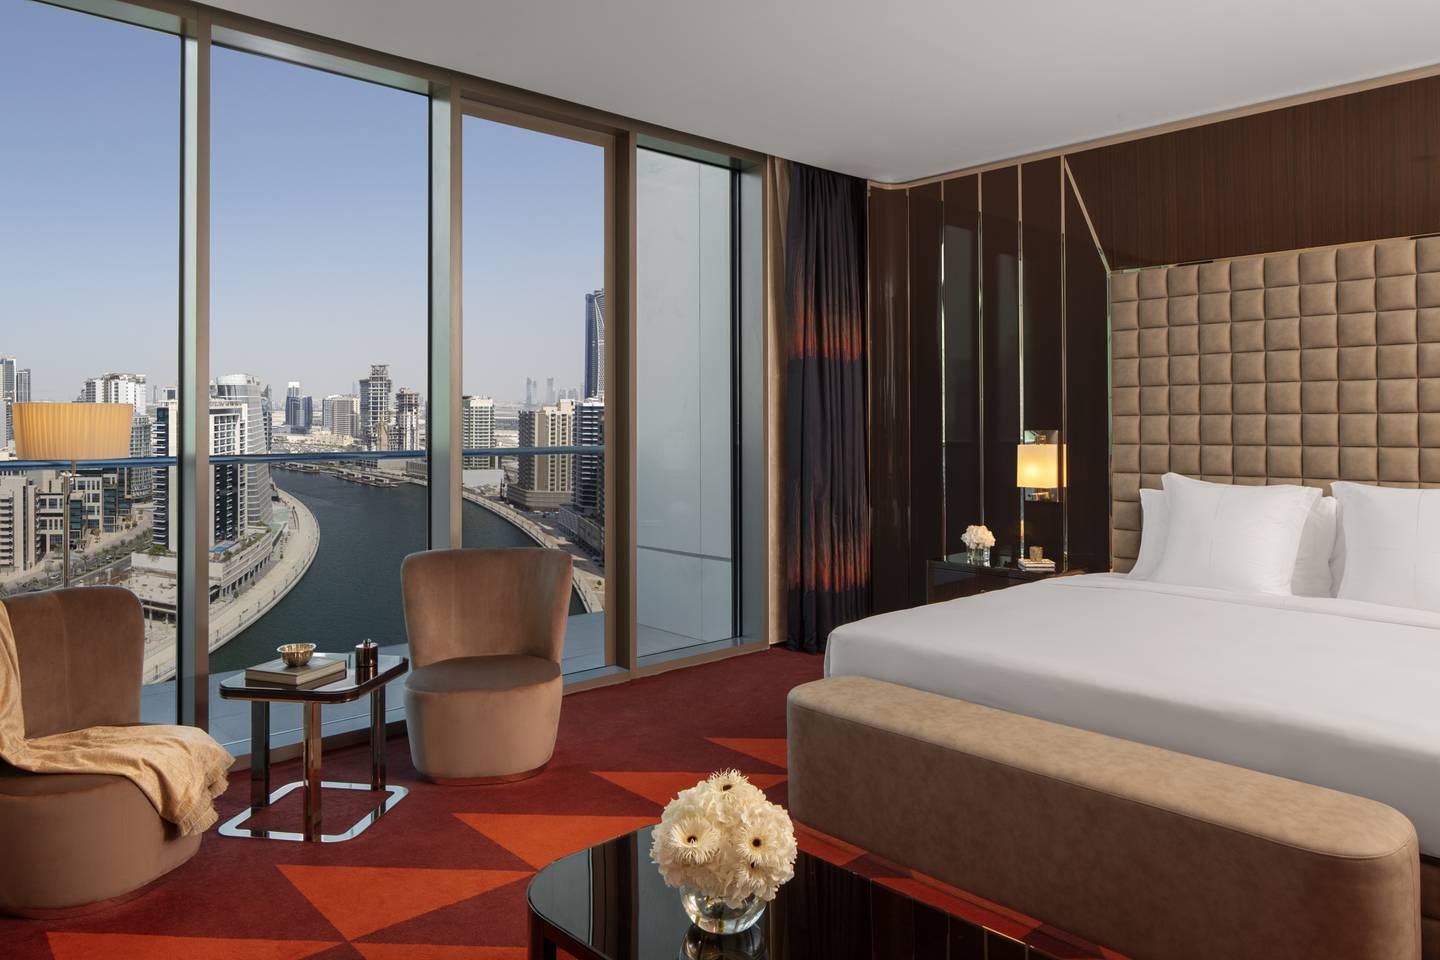 Hyde Hotel Dubai has 276 guest rooms, all with private balconies.  Photo: Hyde Hotel Dubai